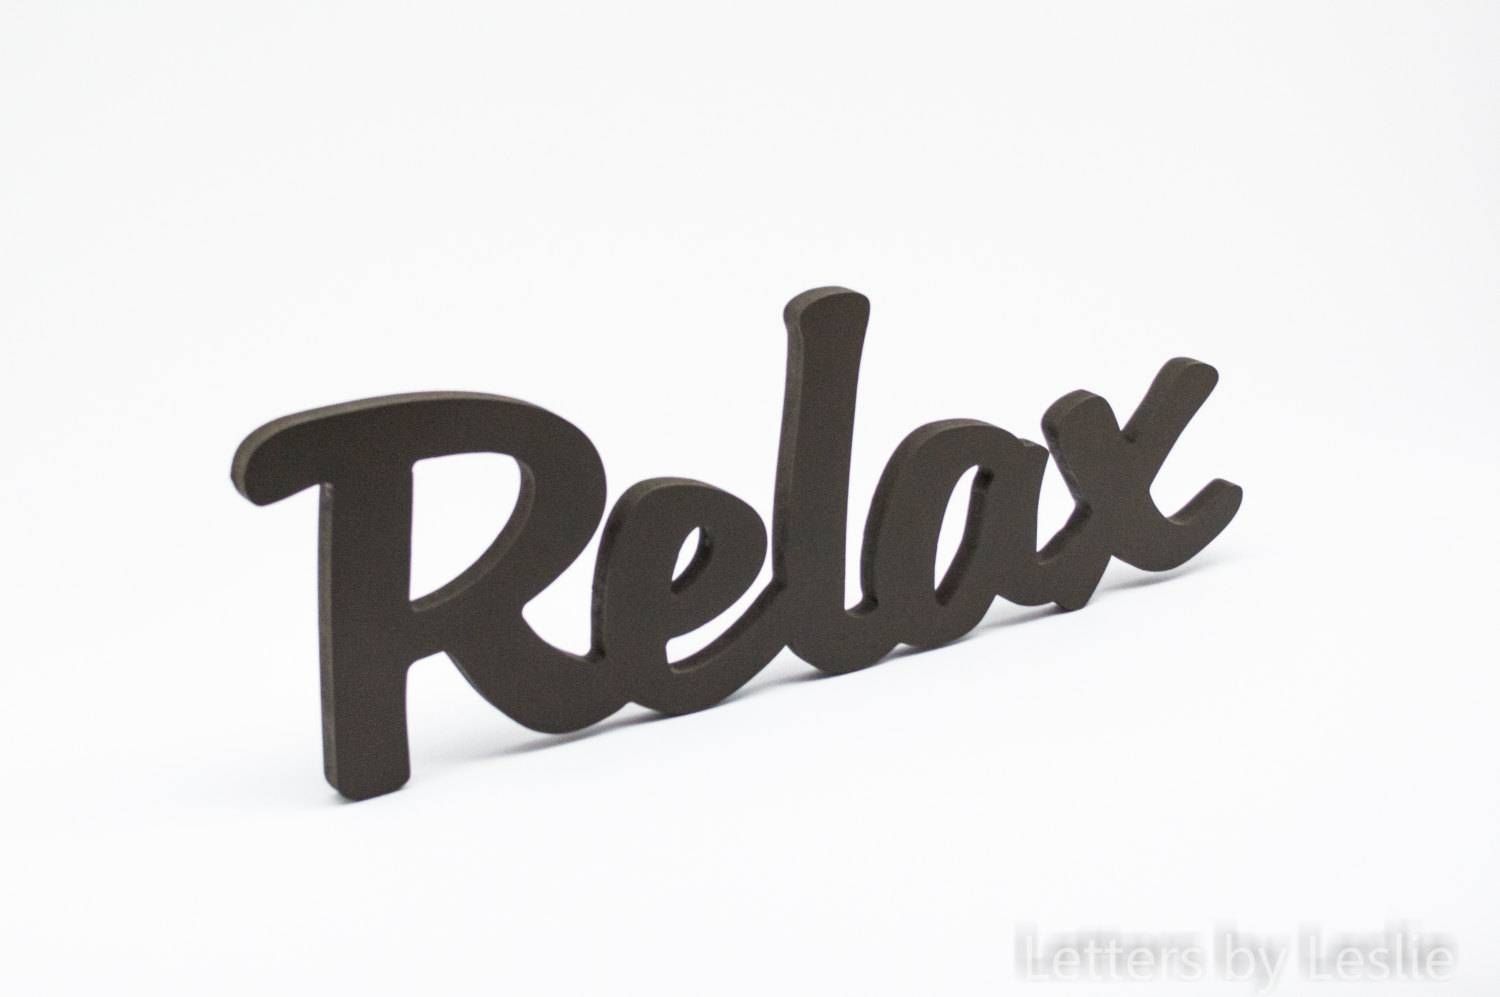 Wall Art Wooden Words | Wallartideas For Current Wood Word Wall Art (View 13 of 22)